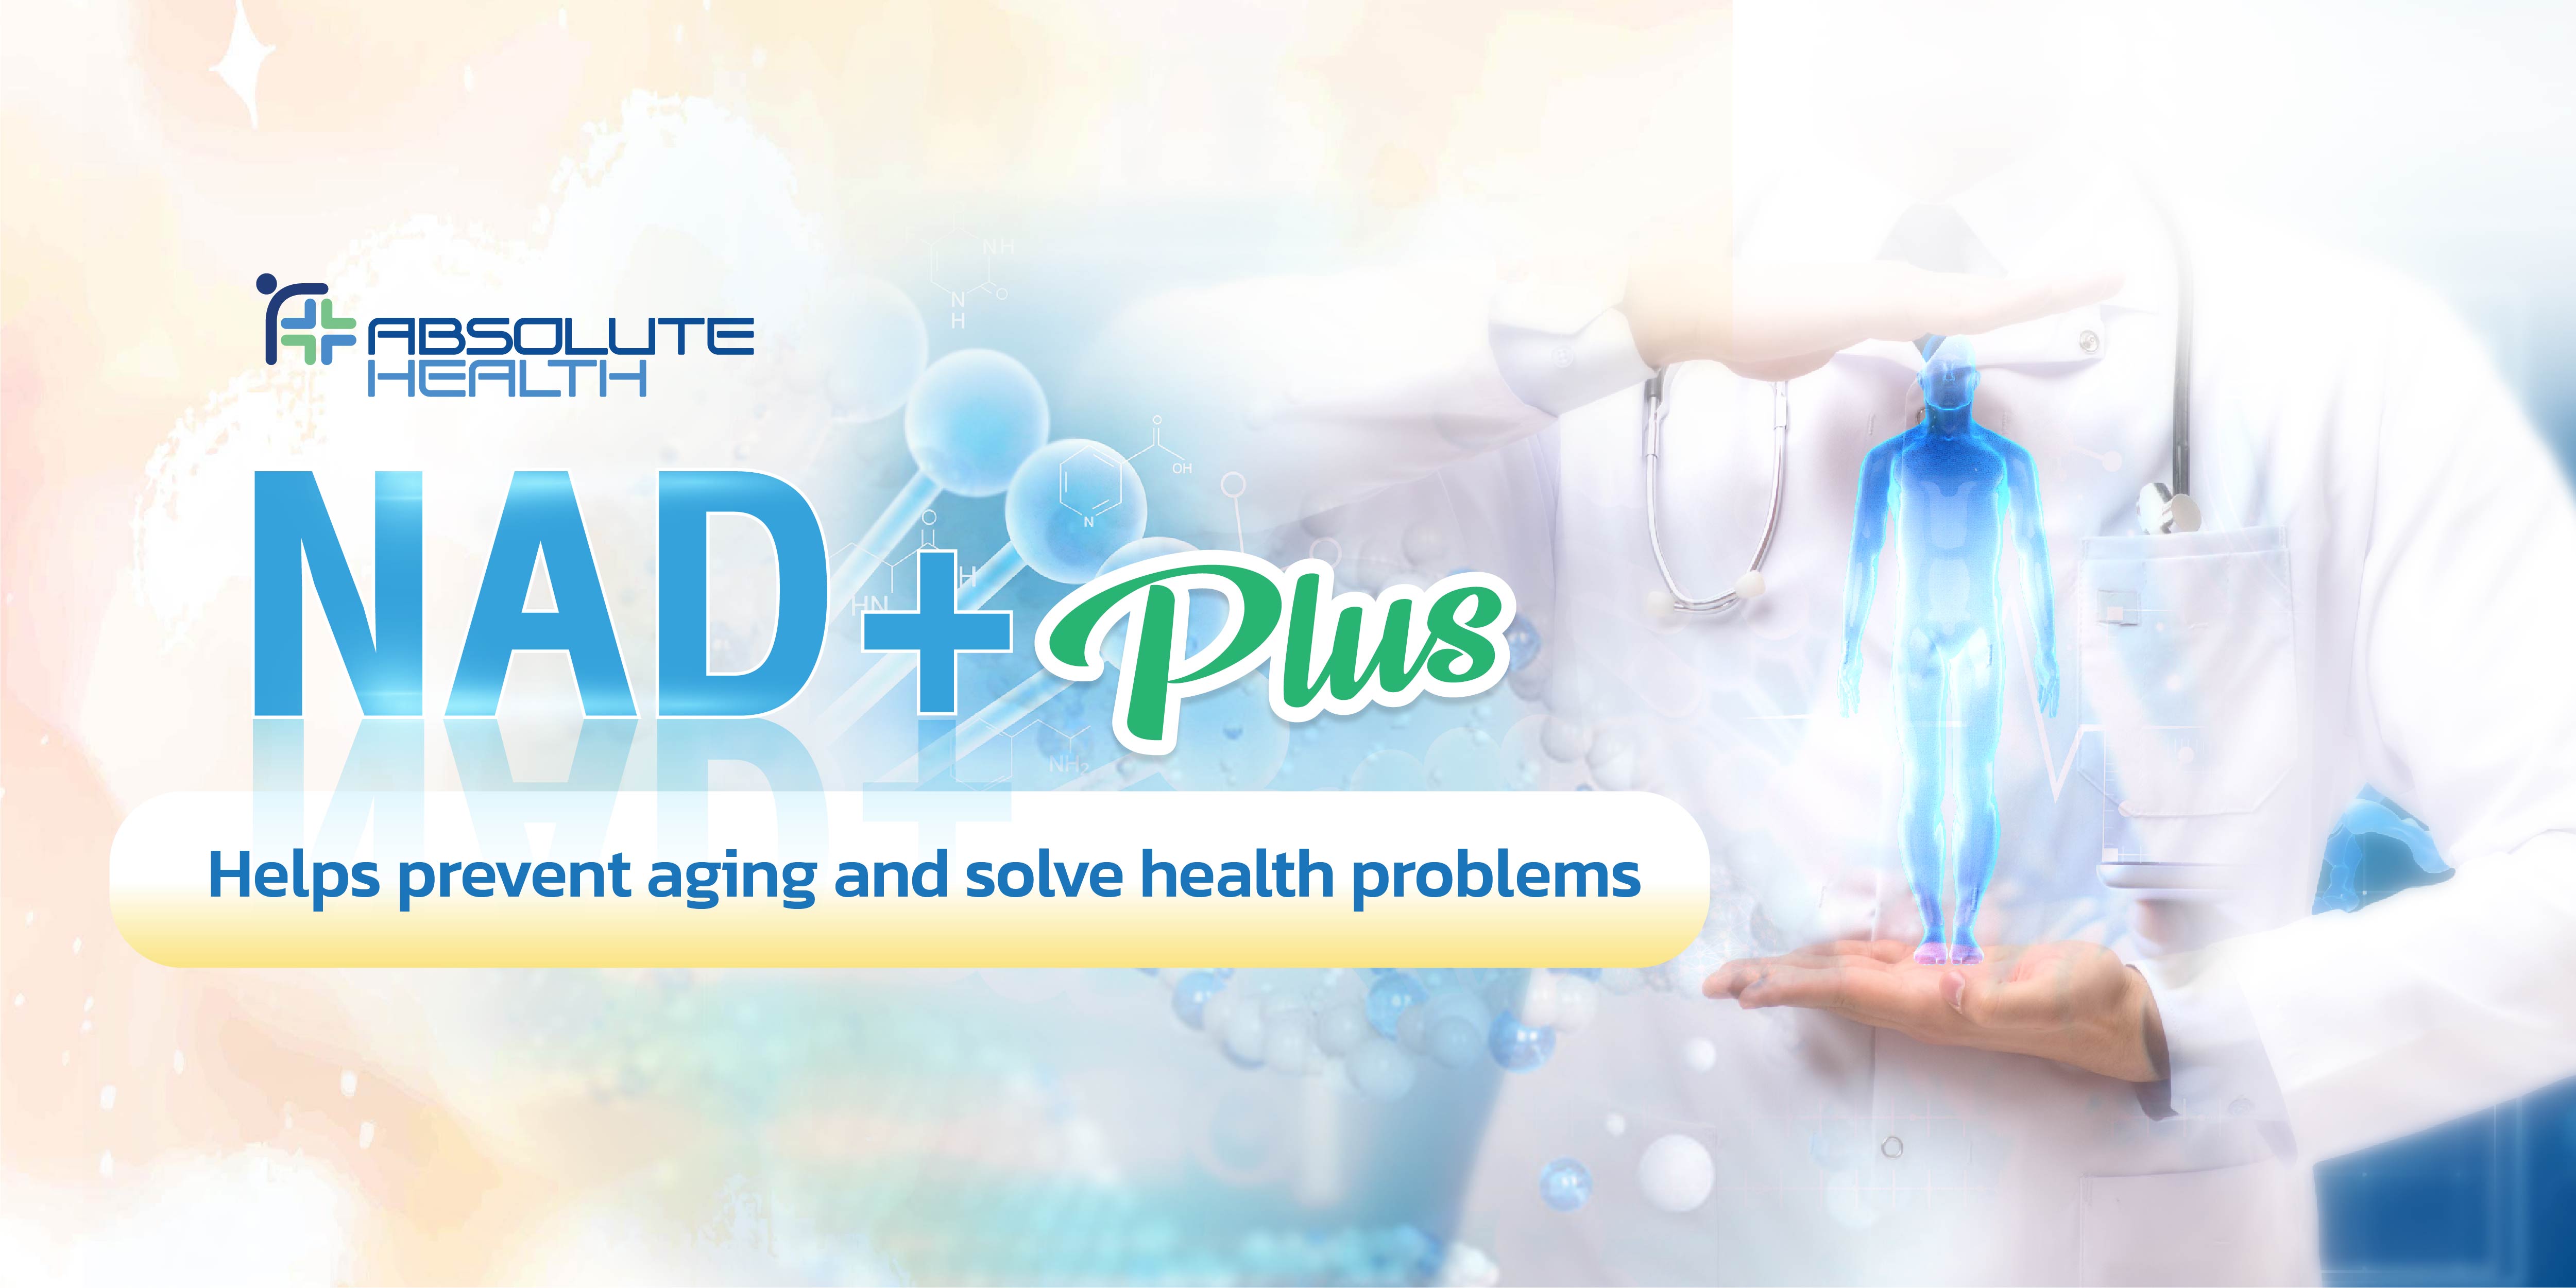 NAD+ Helps prevent aging and solve health problems